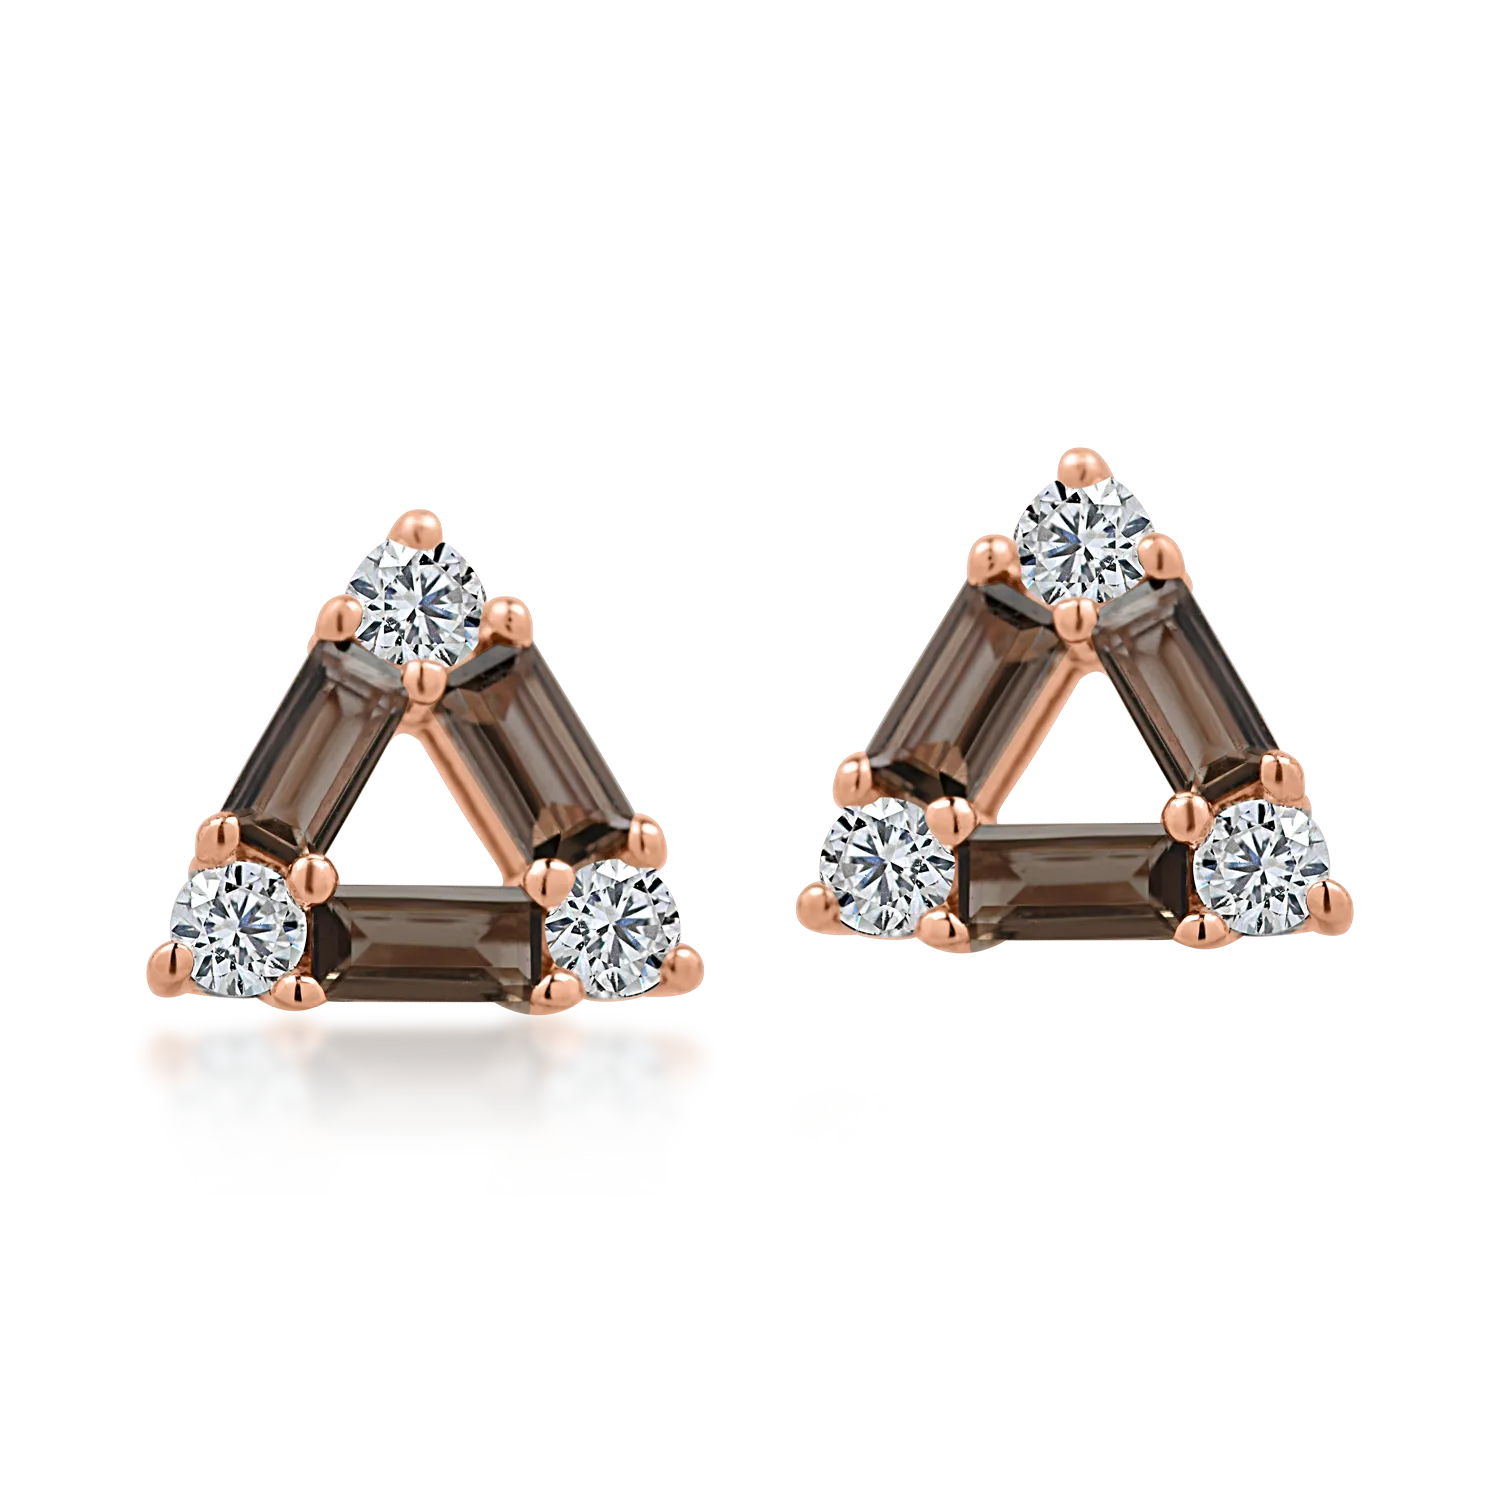 Rose gold earrings with 0.58ct smoky quartz and 0.325ct diamonds